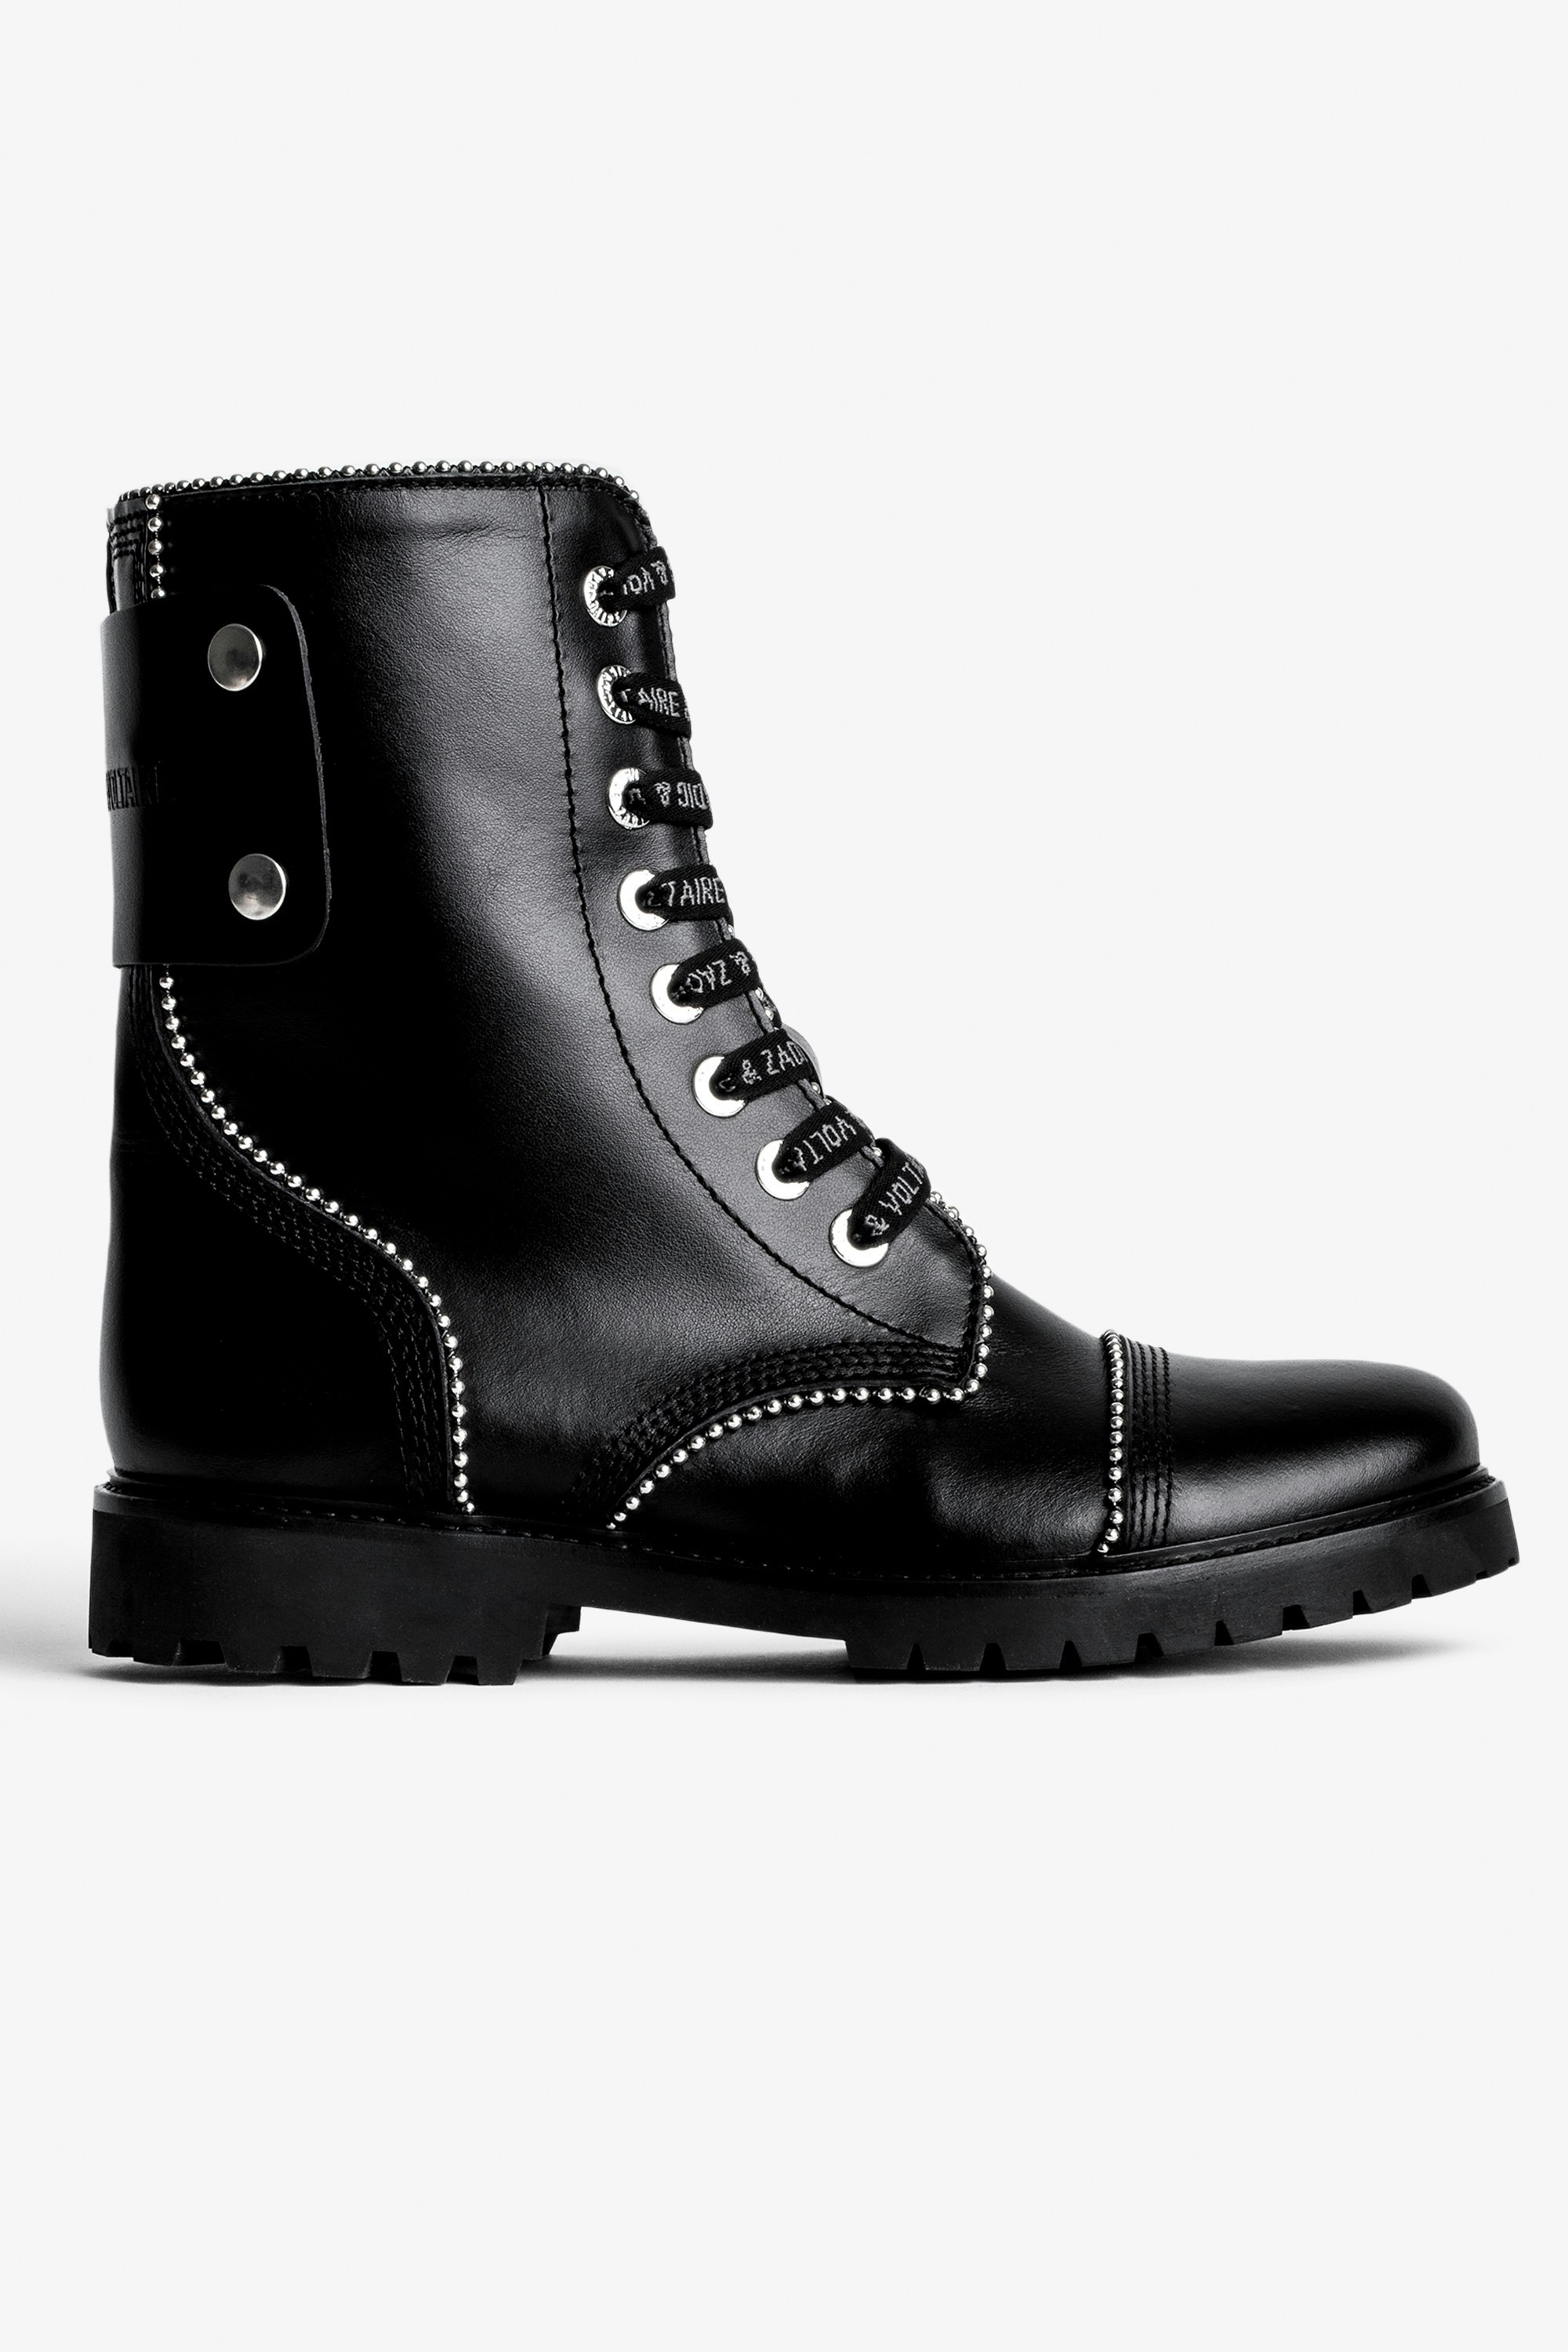 Joe Ankle Boots Women's studded smooth black leather combat boots